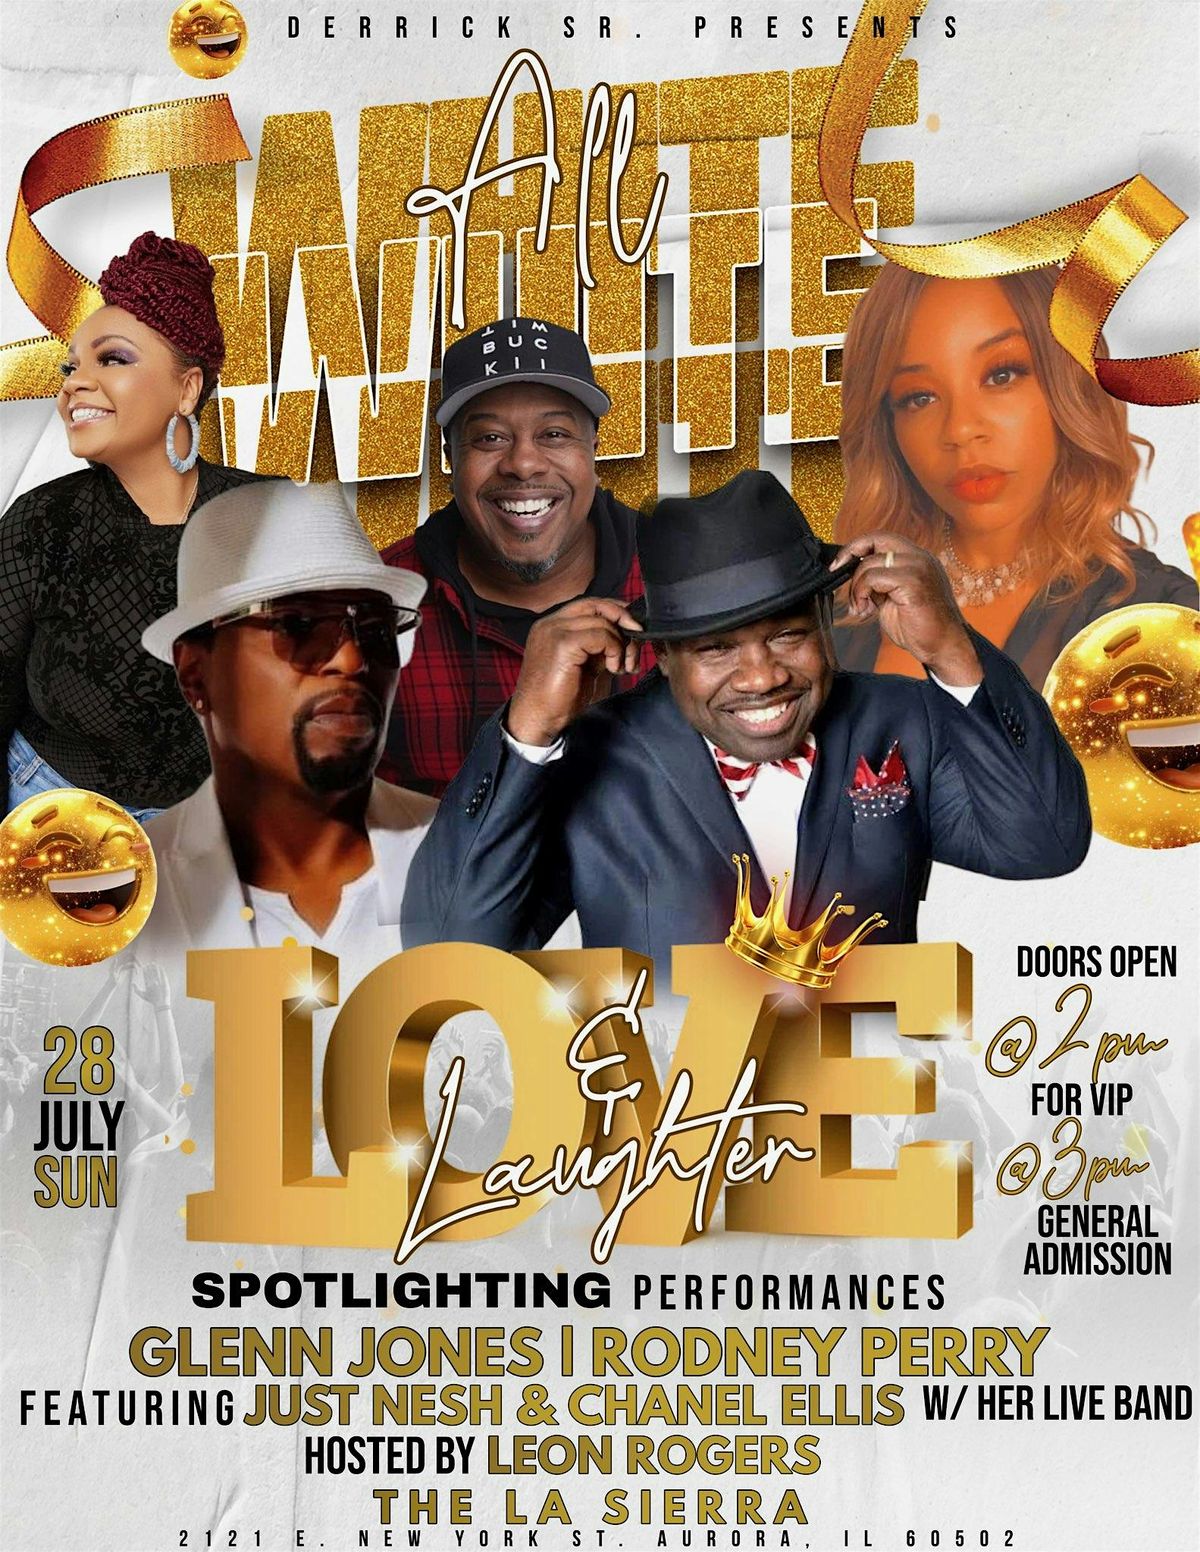 Derrick Sr. Presents, The All White, Love & Laughter Experience